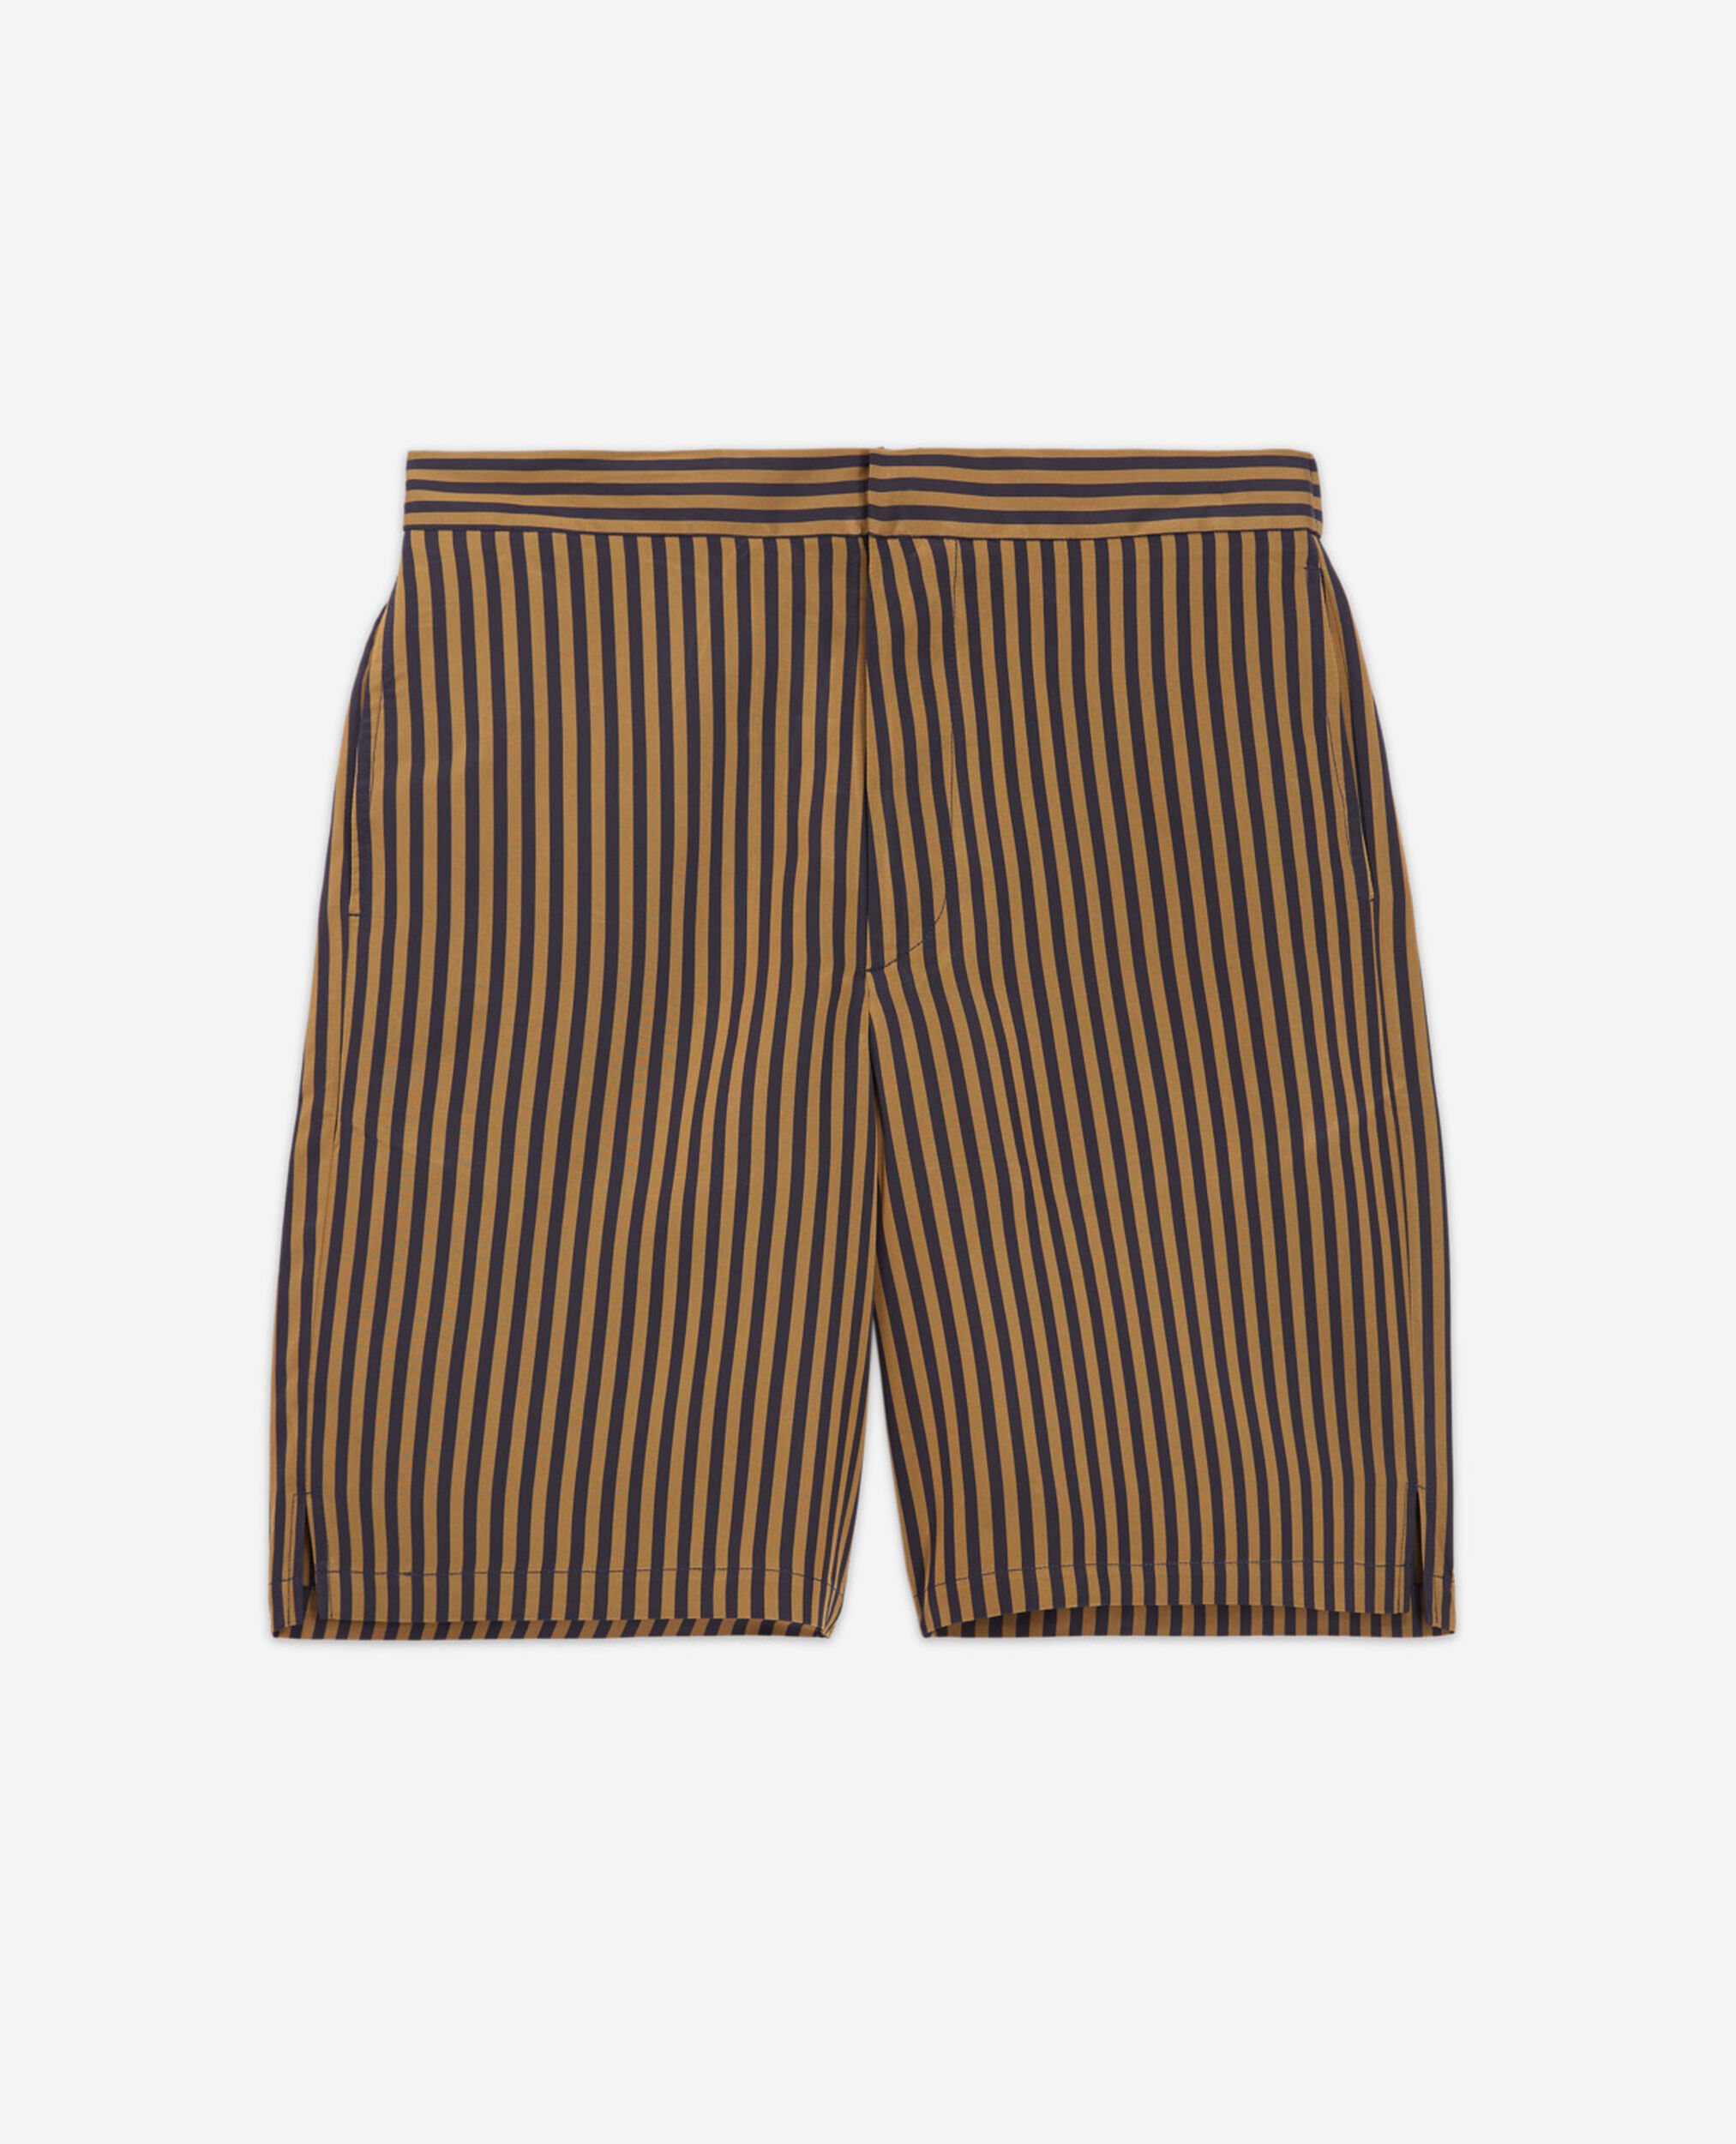 Flowing navy blue striped shorts, NAVY / BROWN, hi-res image number null